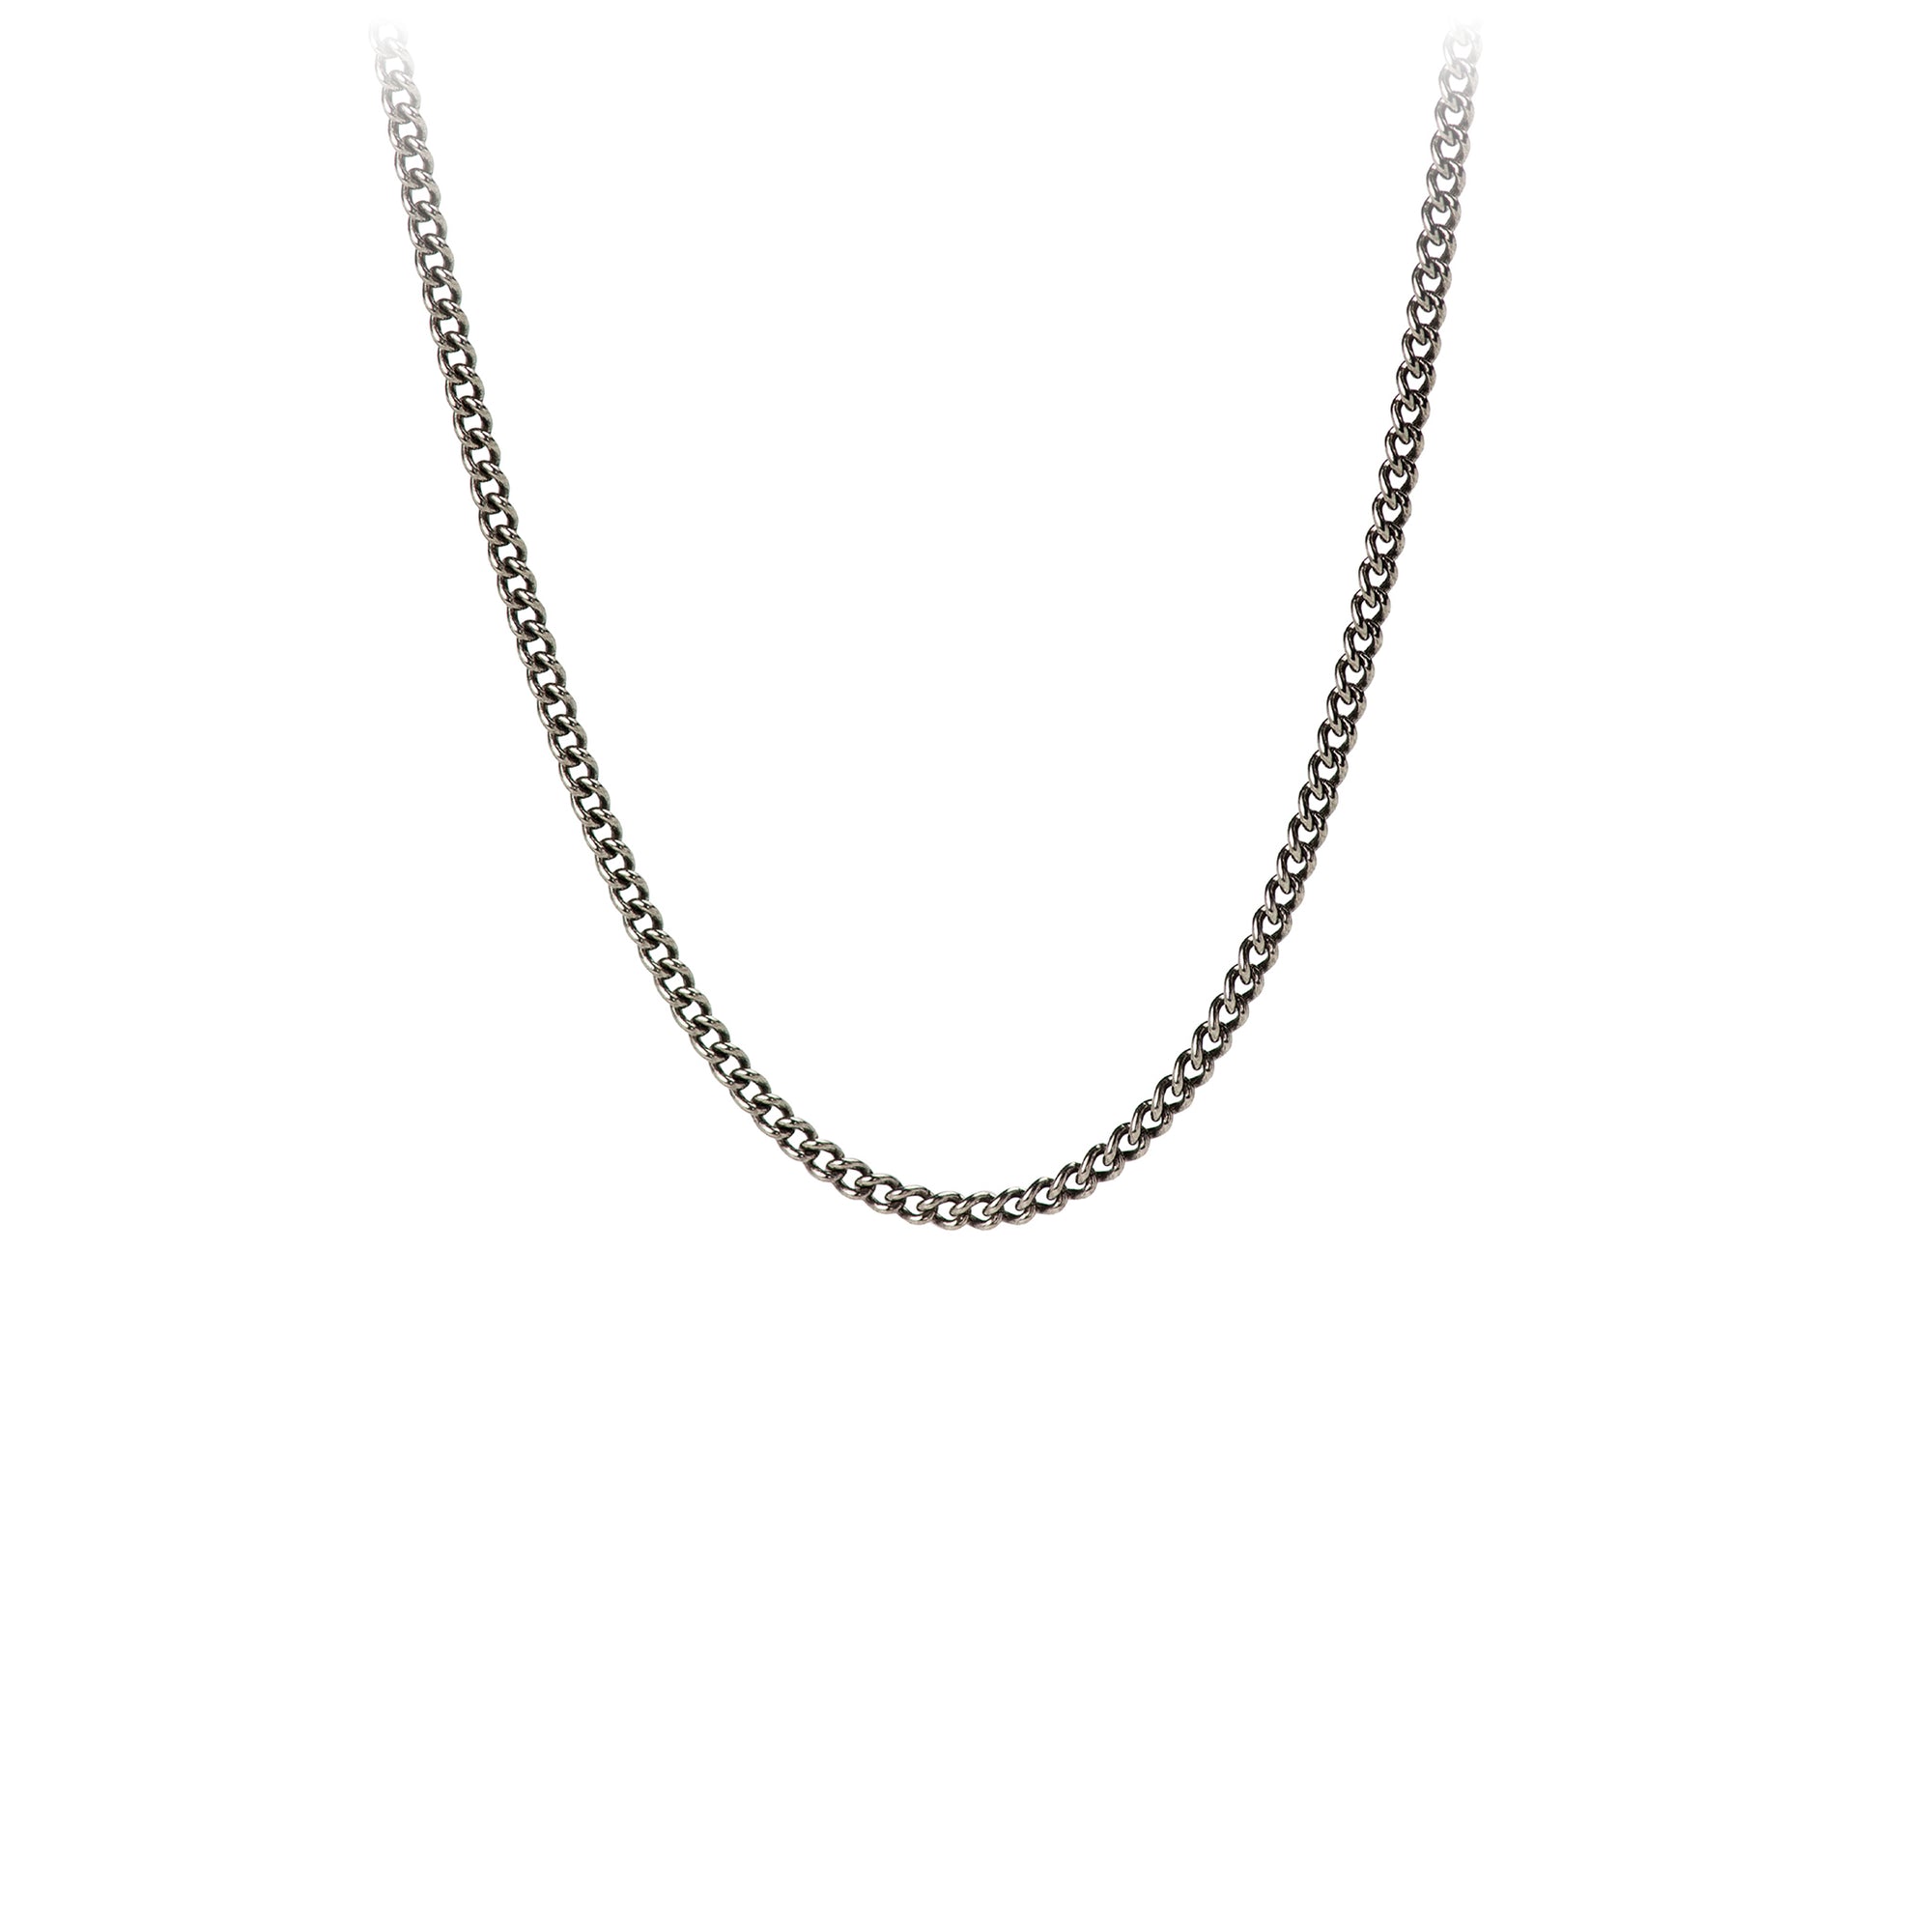 A sterling silver chain with medium oxidized curb links